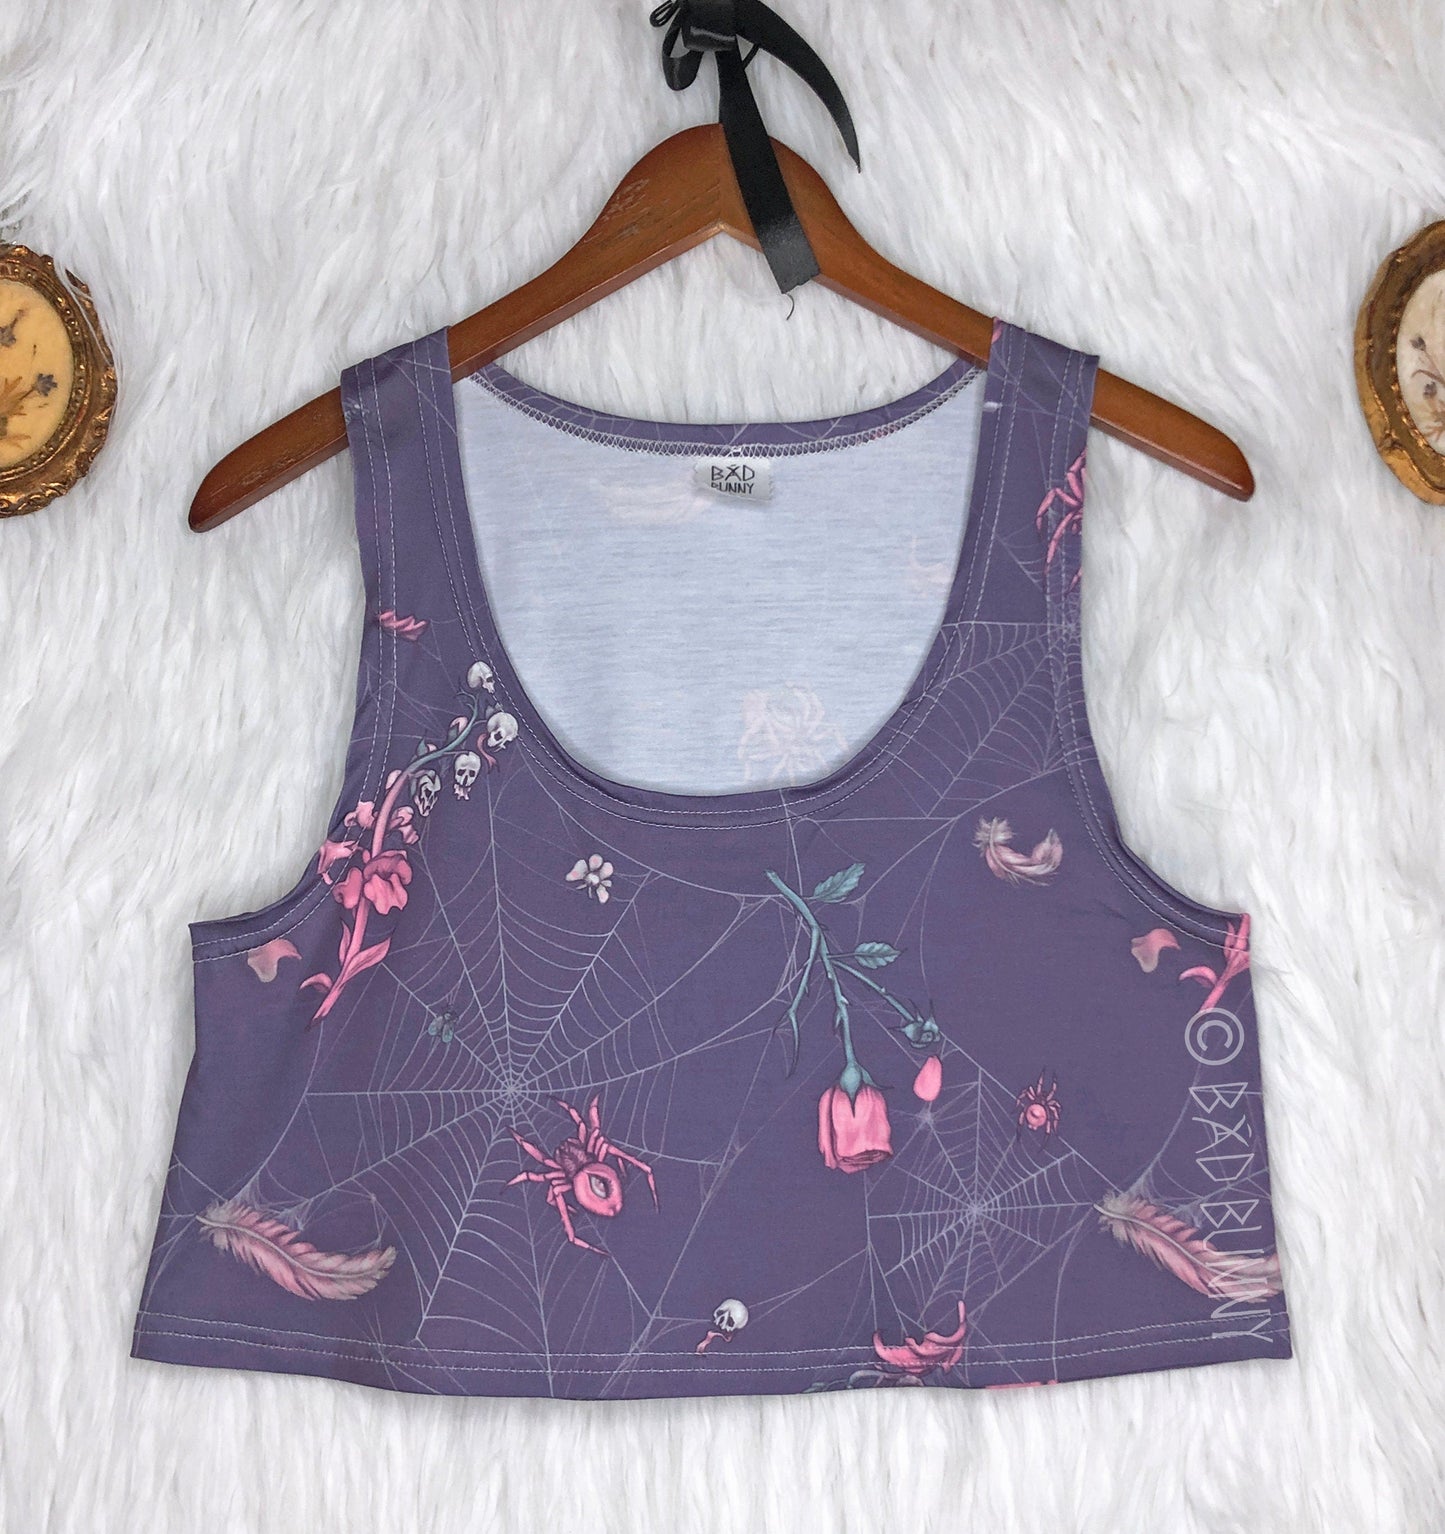 Crop Top - Lavender Webs - Ready to Ship